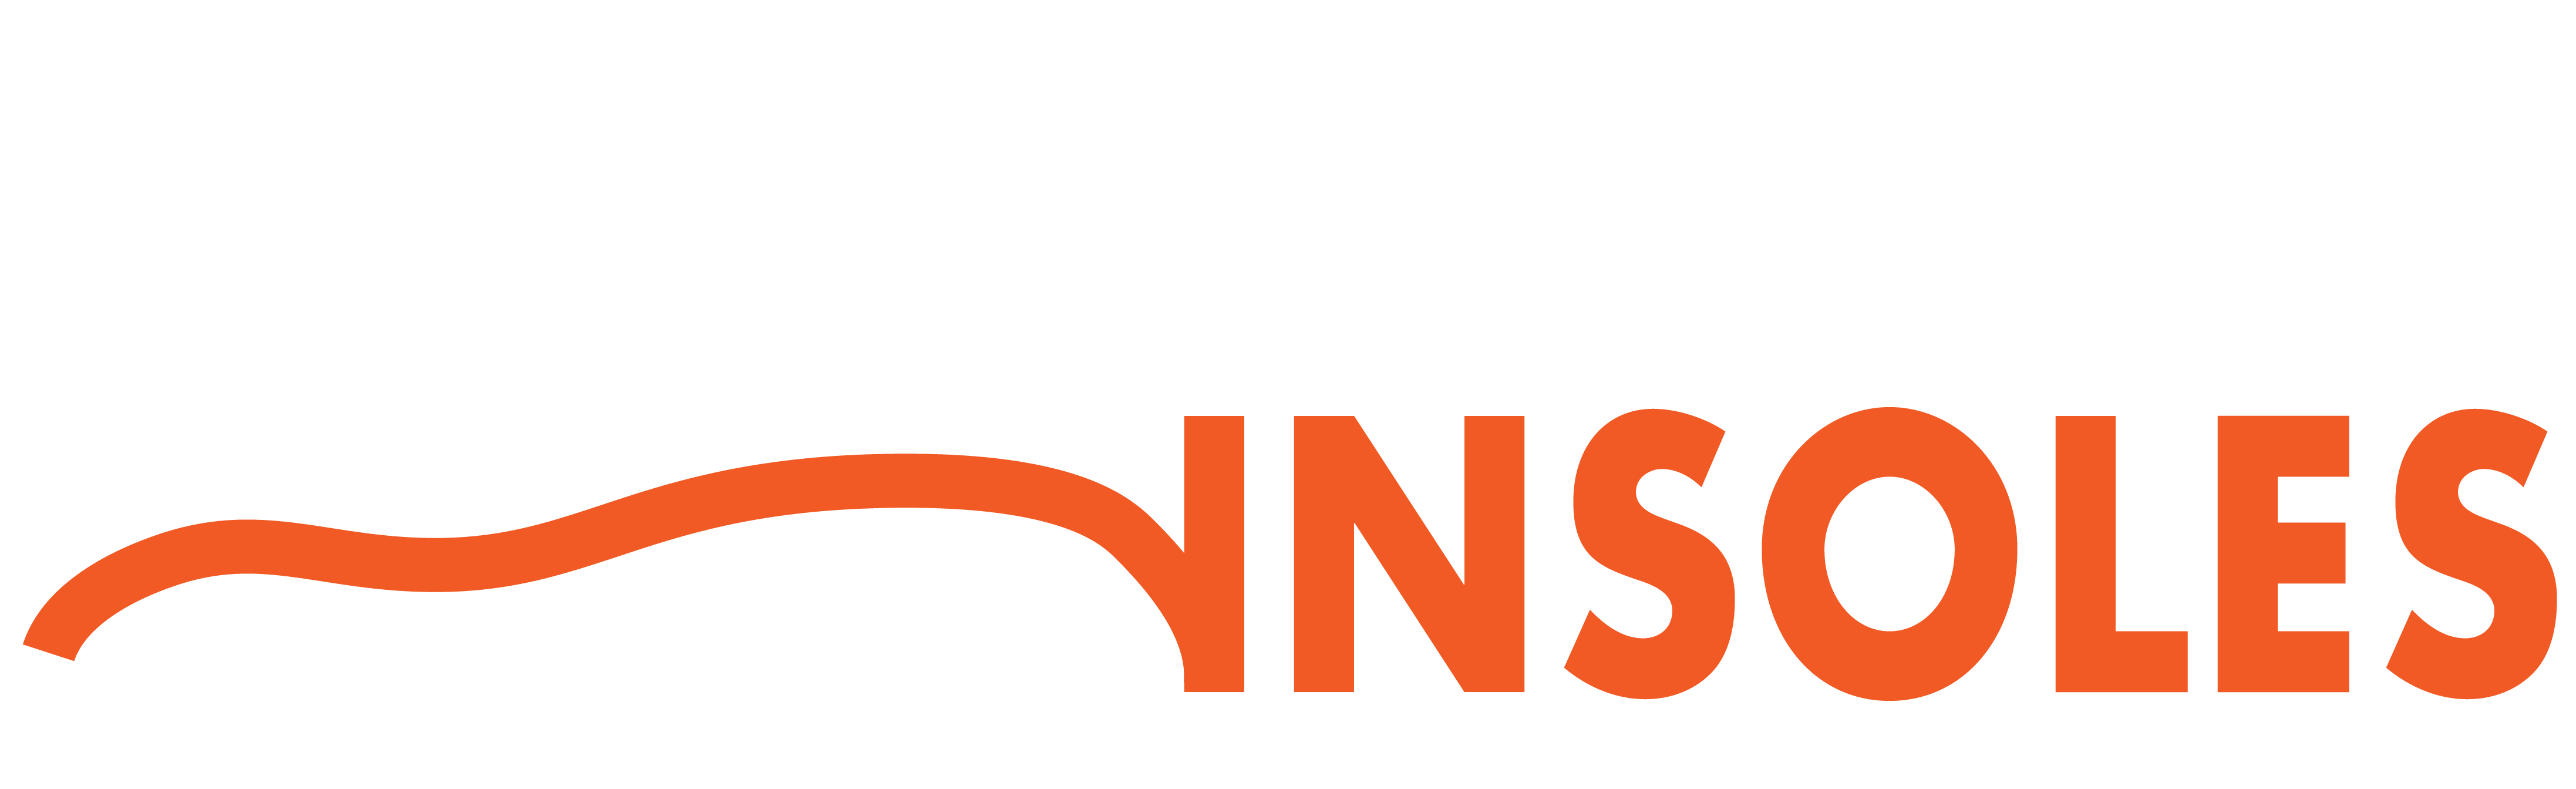 Twin Cities Insoles Logo